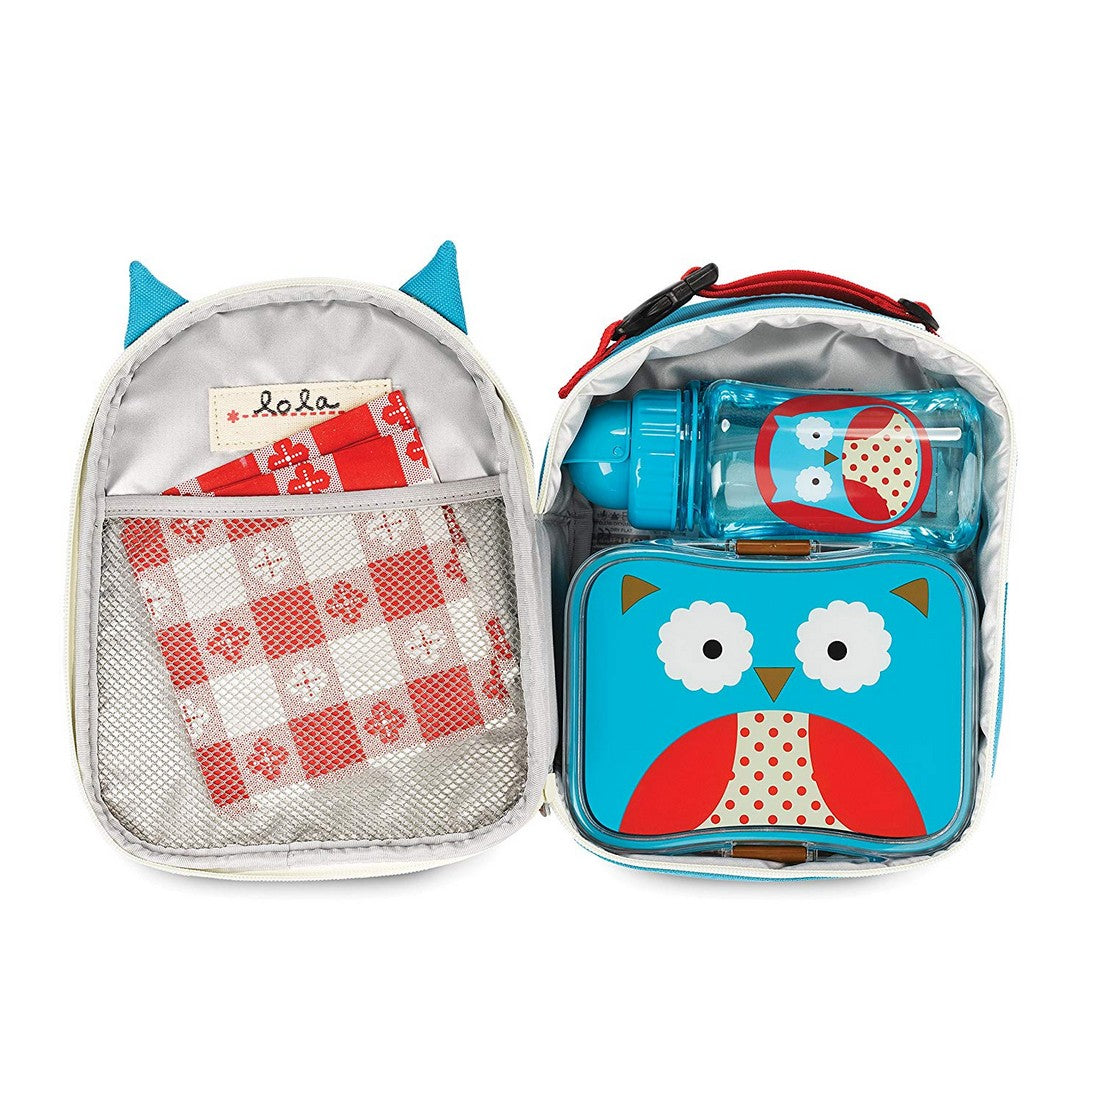 Skip Hop Zoo Lunch Kit Lunch Box Owl 3Y to 6Y